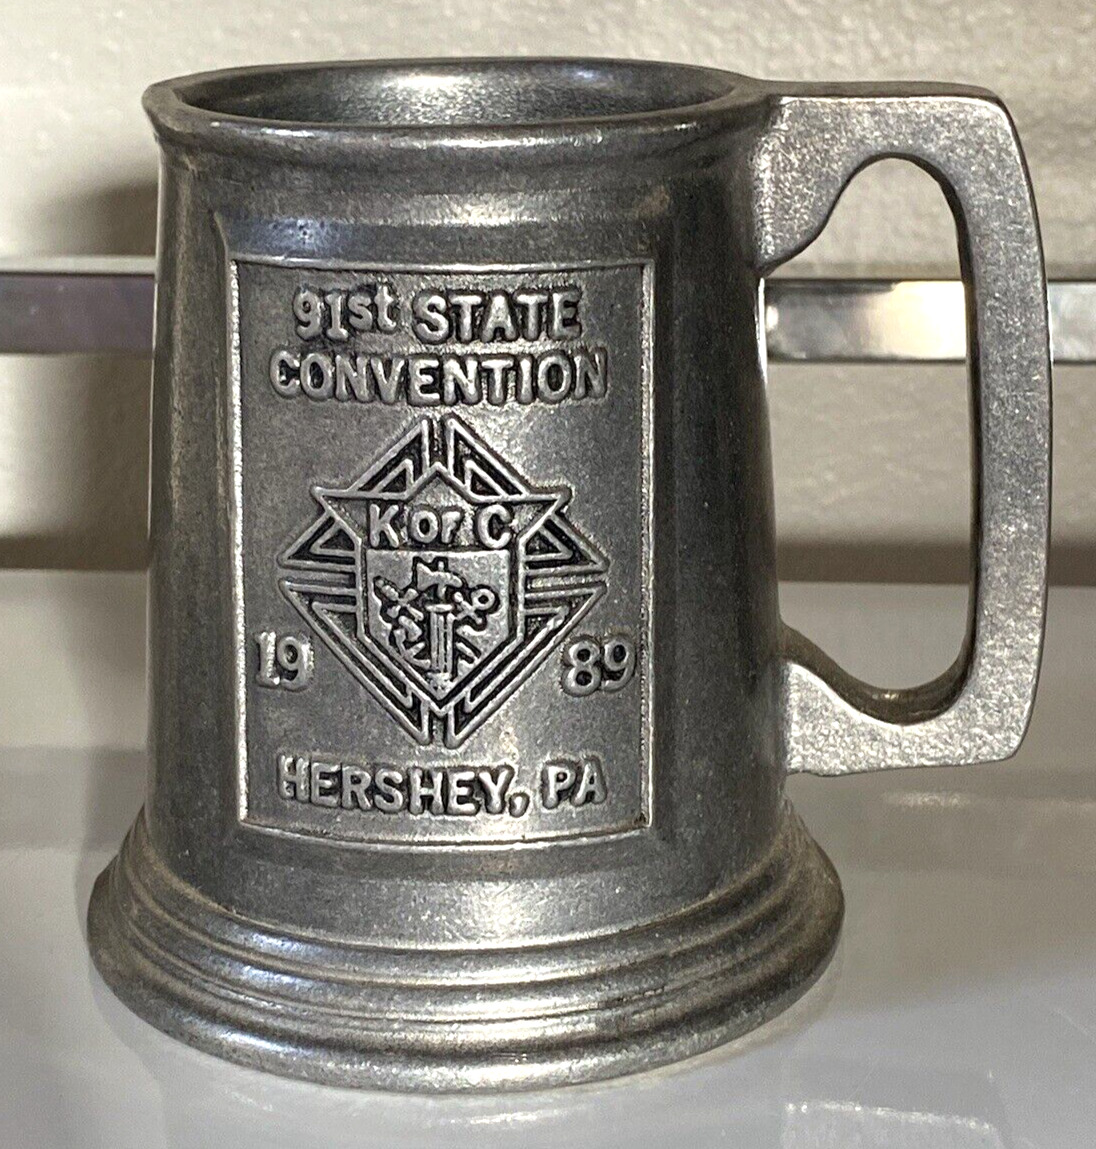 VTG Pewter Mug Knights of Columbus 1989-Hershey, PA 91st State Convention